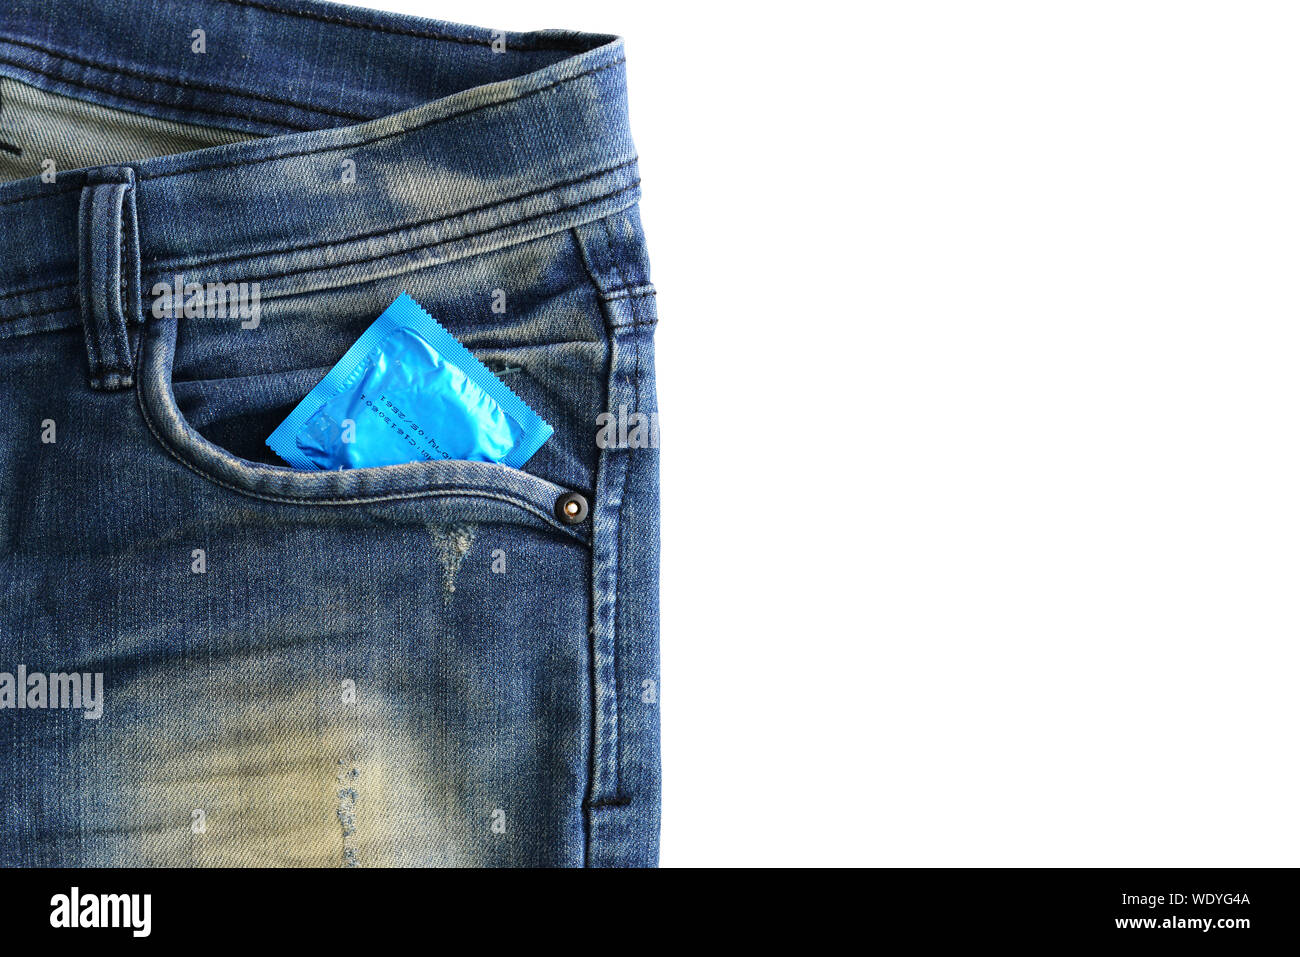 Close-up Of Condom In Jeans Pocket Over White Background Stock Photo - Alamy